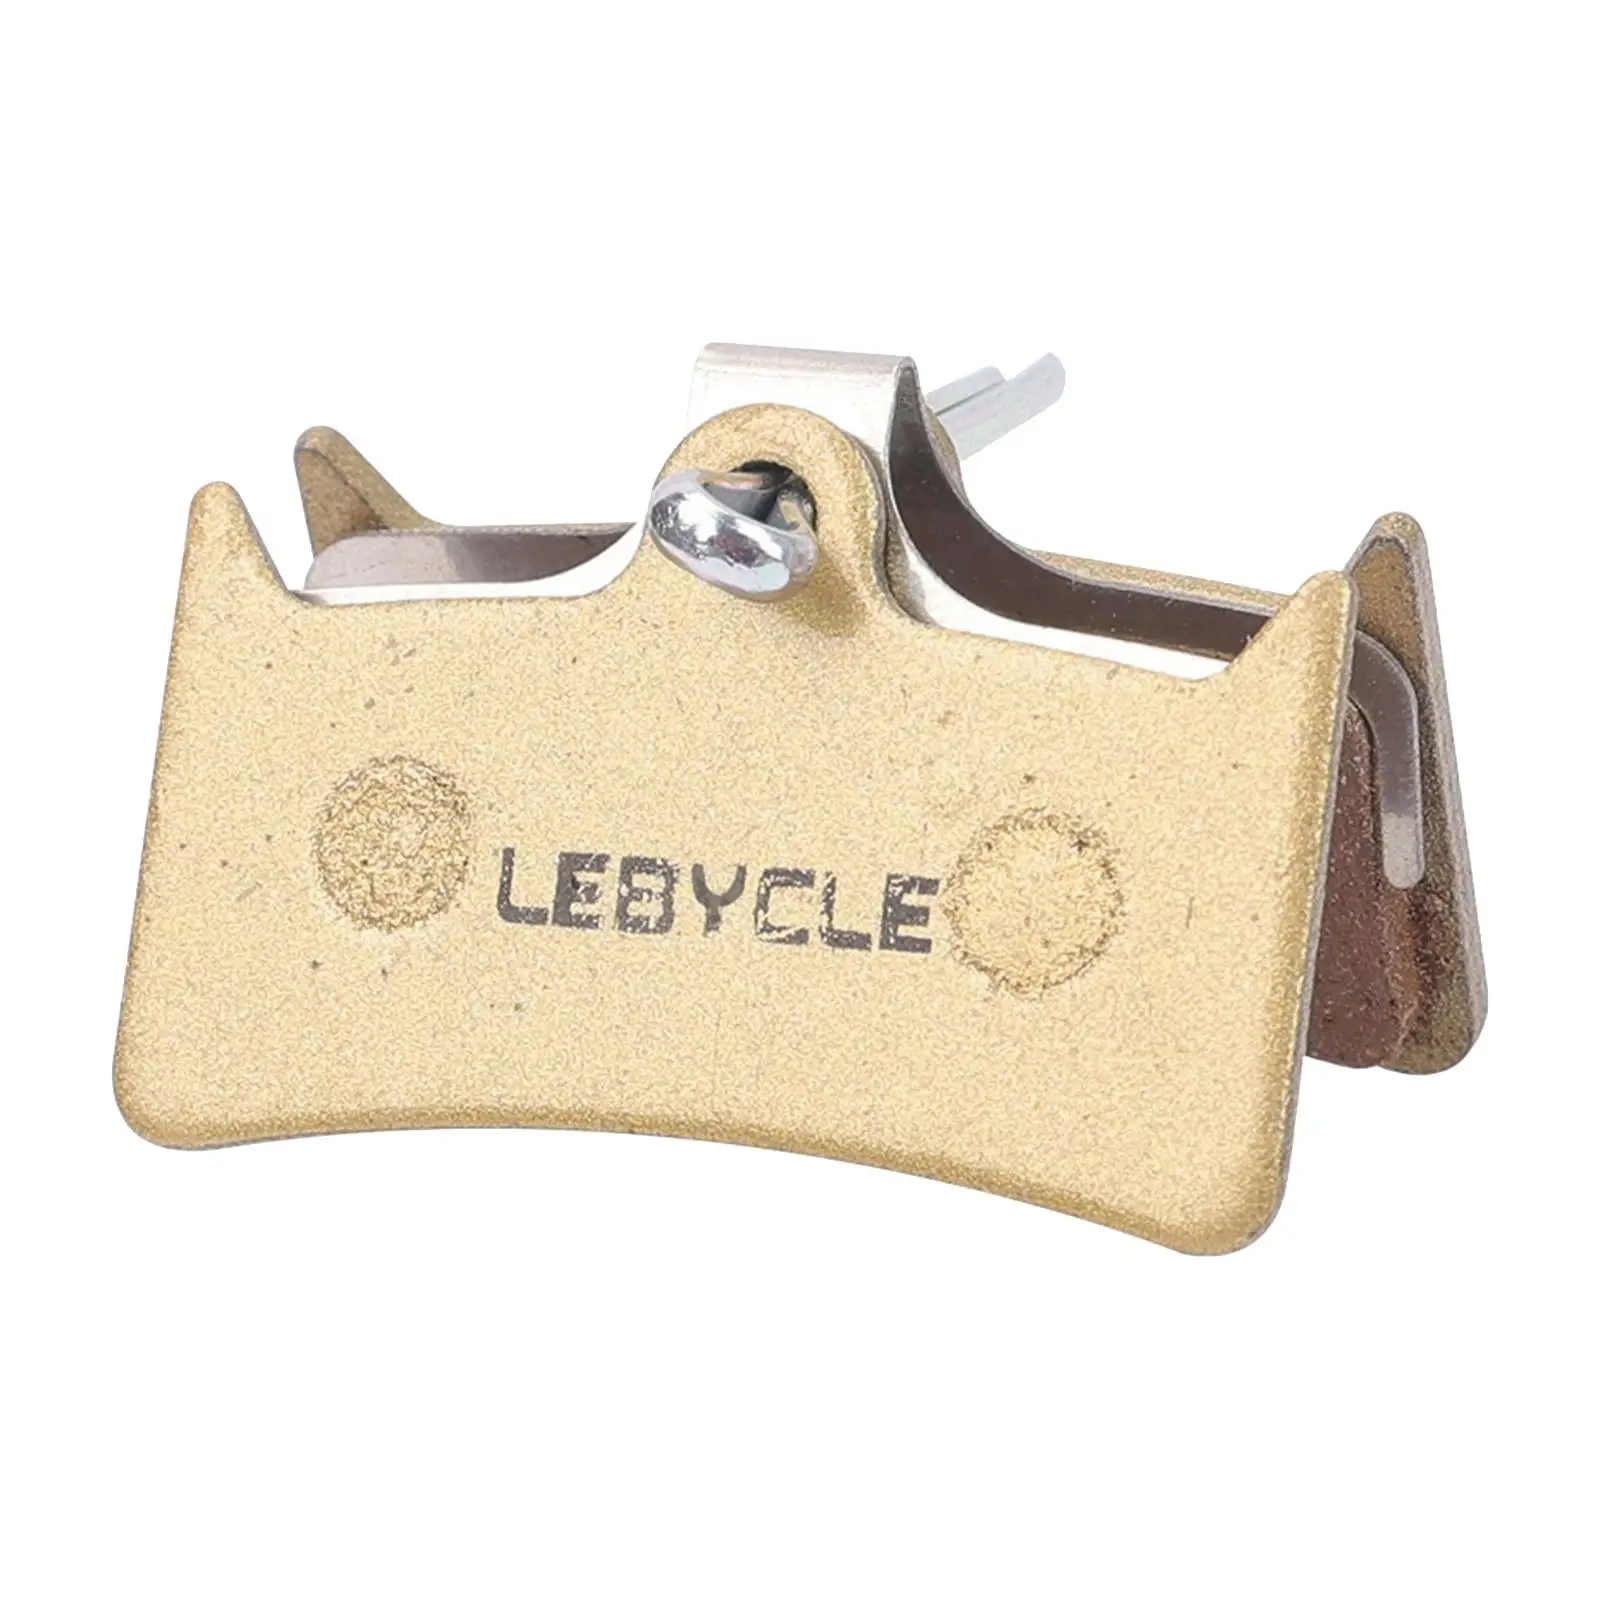 Bike Brake Pads Wear Resistant High Temperature Resistant Sturdy Spare Parts